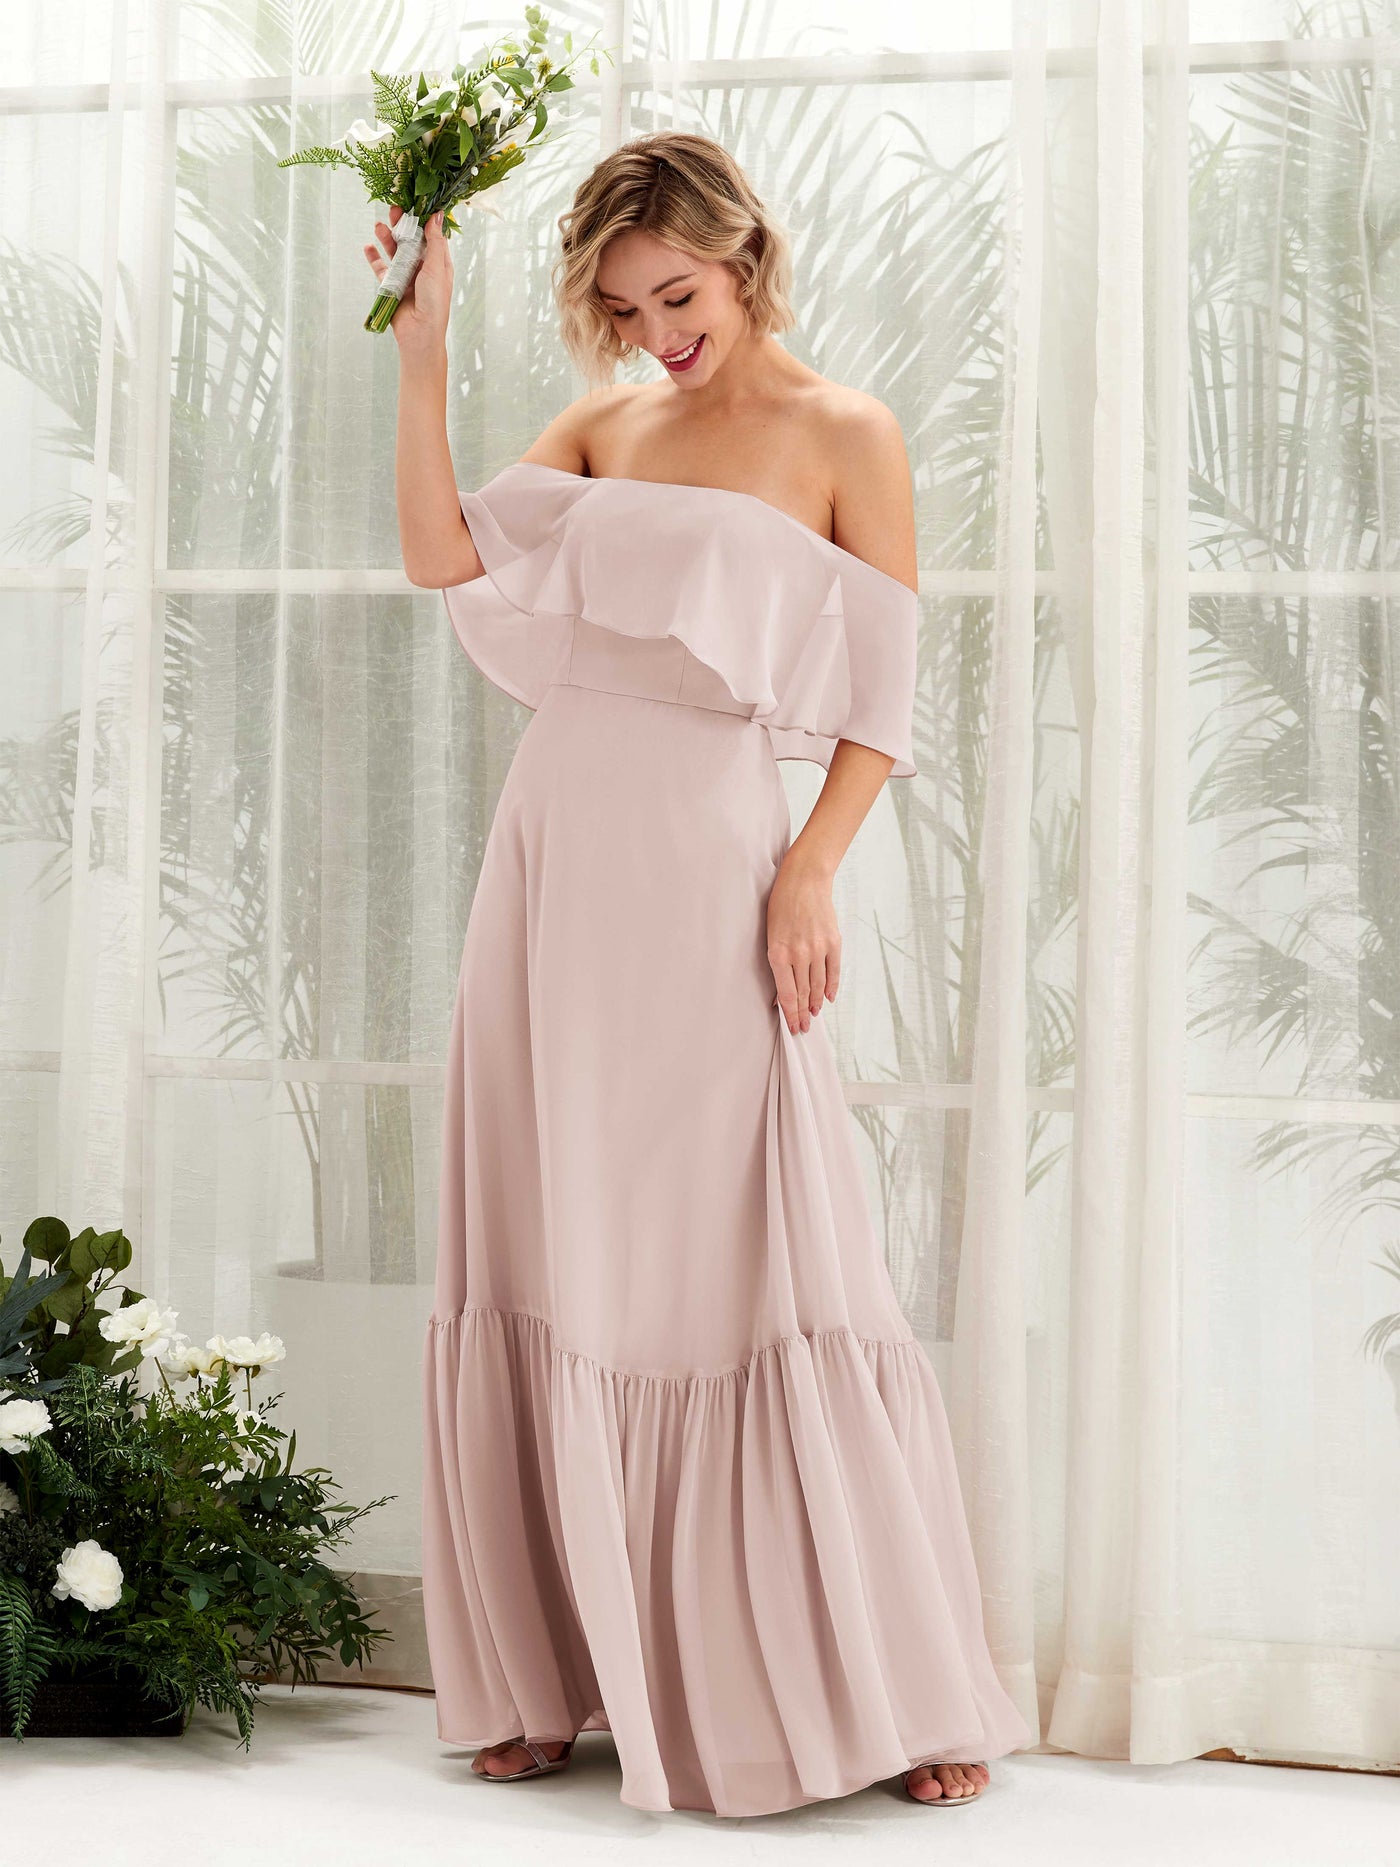 Biscotti Bridesmaid Dresses Bridesmaid Dress A-line Chiffon Off Shoulder Full Length Sleeveless Wedding Party Dress (81224535)#color_biscotti